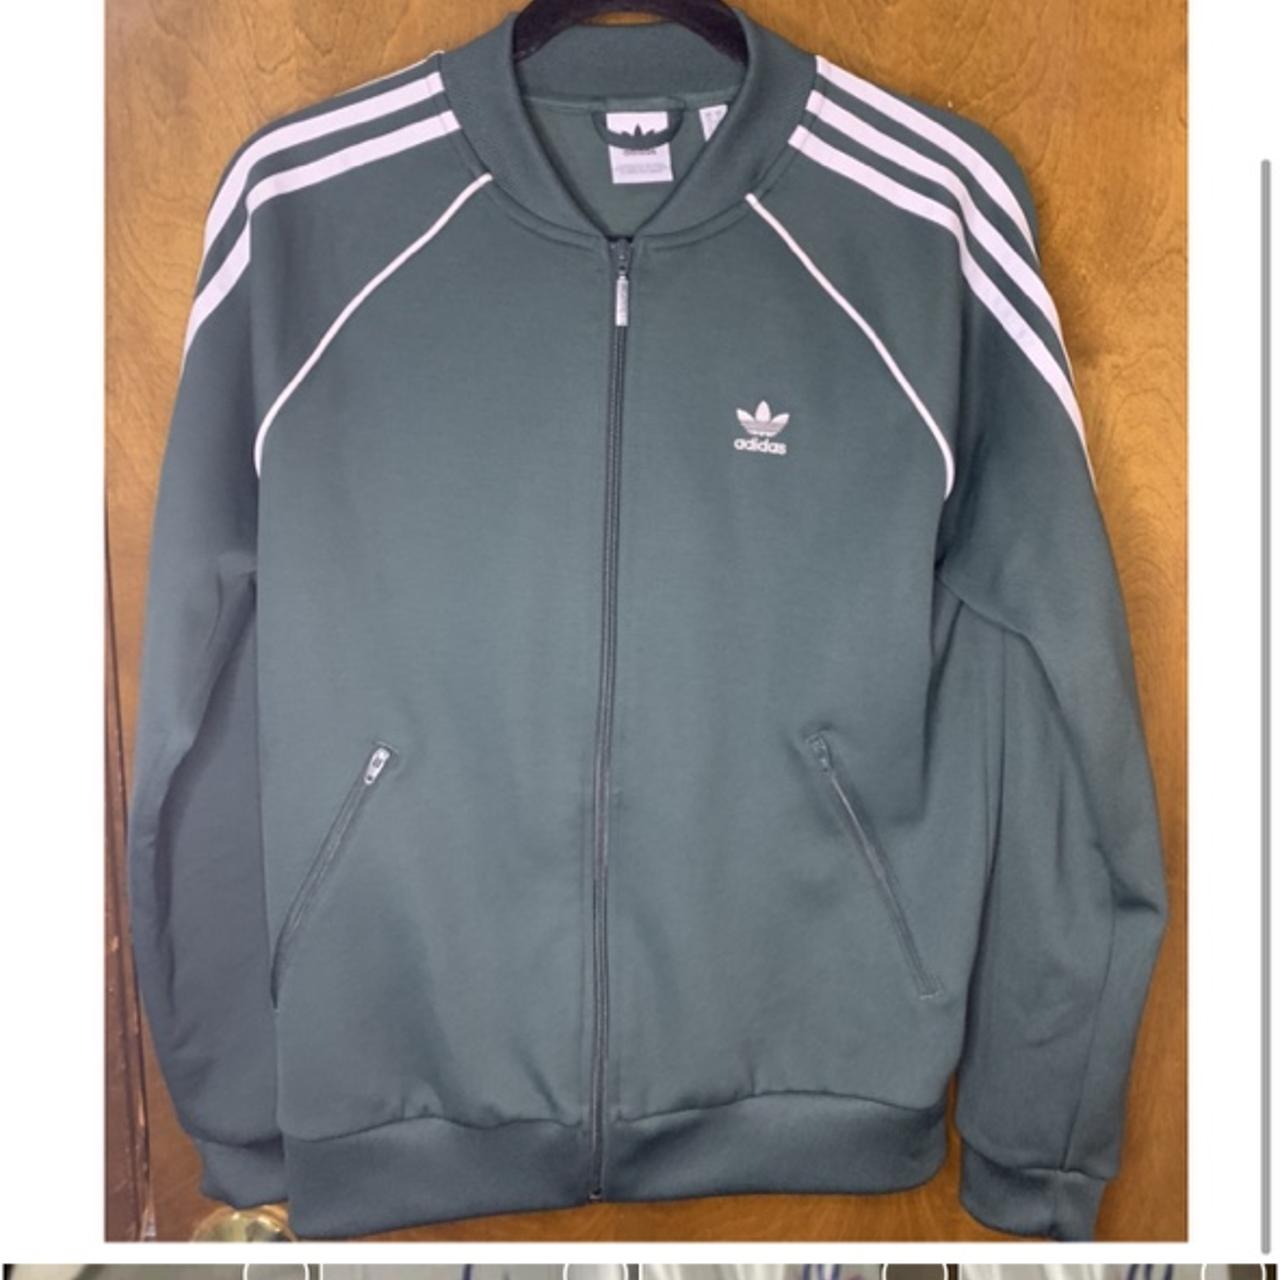 Adidas Green SST TRACK JACKET - Great used condition... - Depop